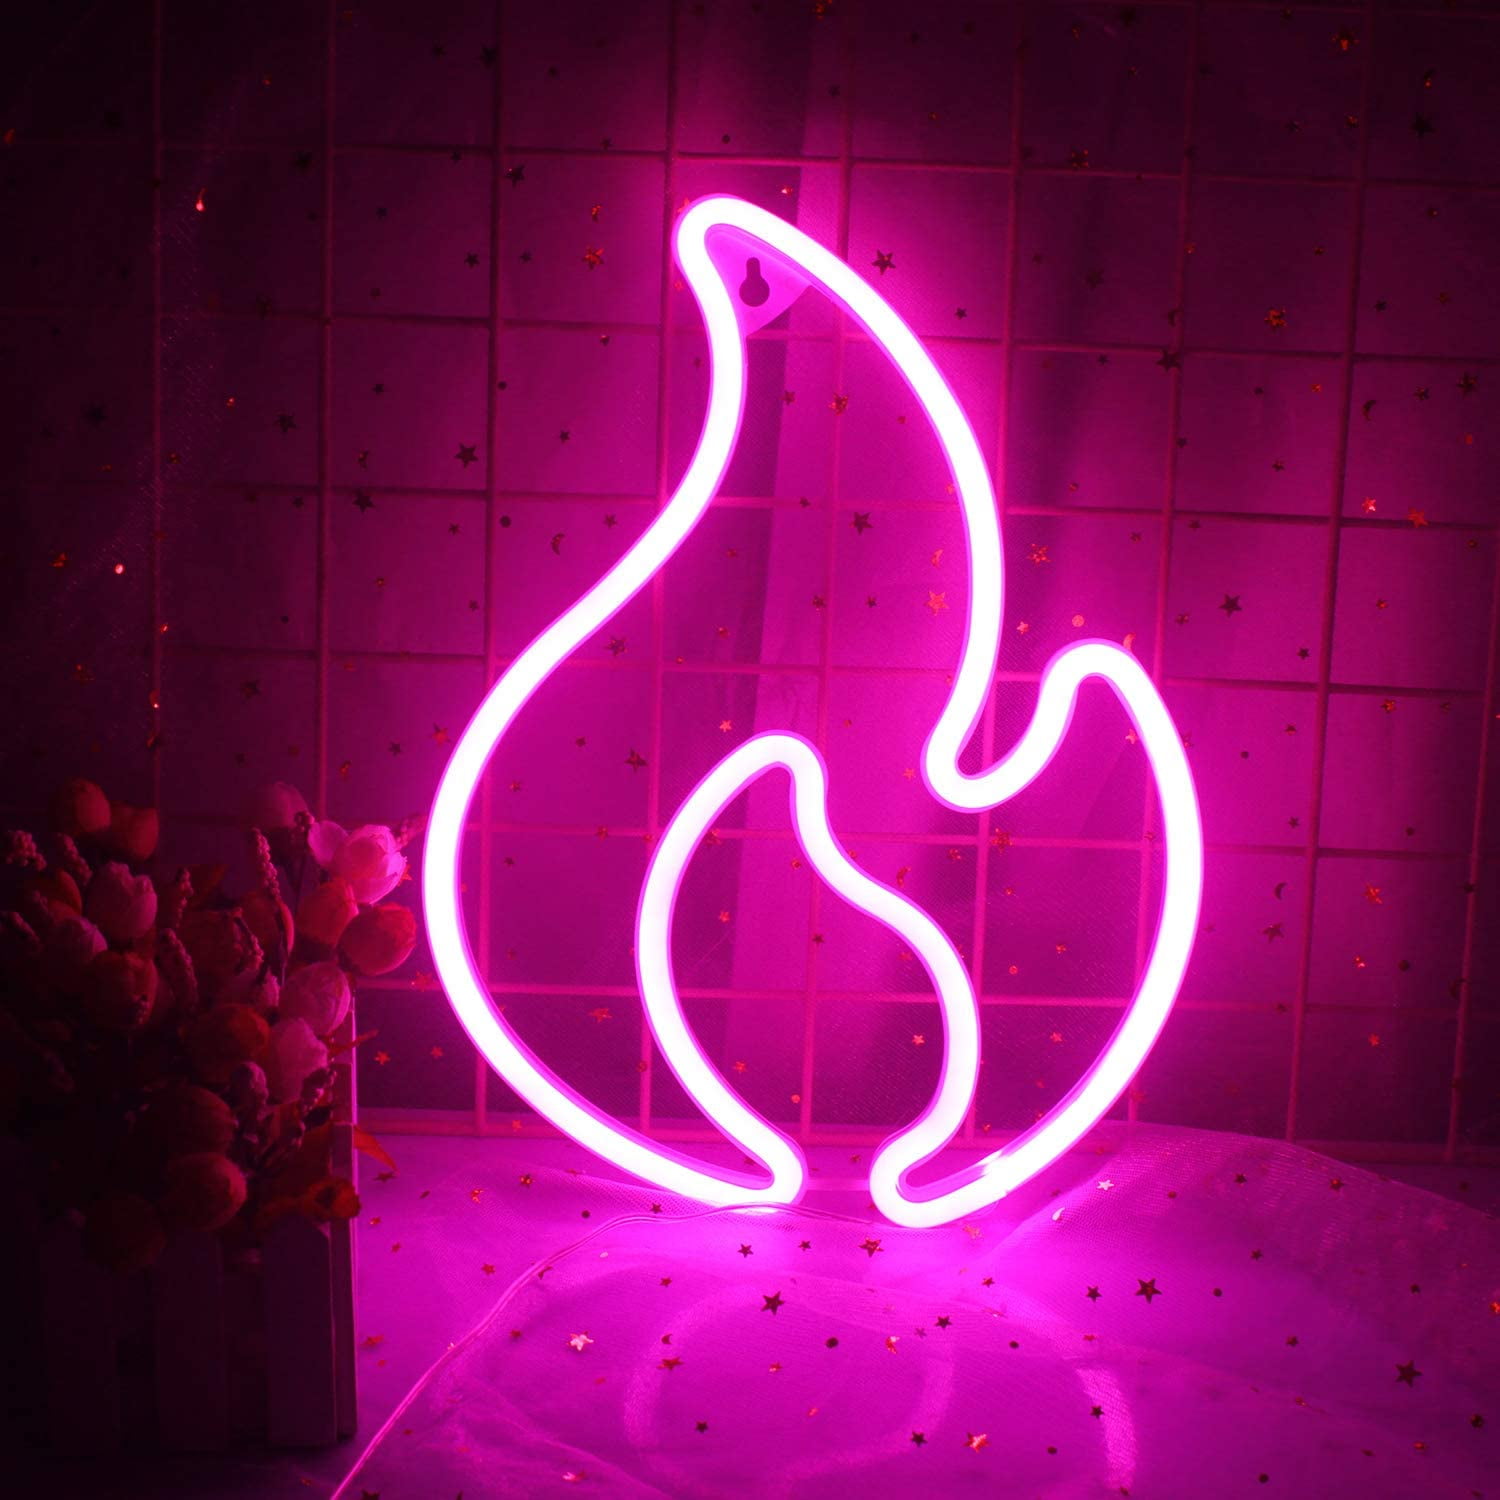 Flame Neon Signs for Wall Decor, Fire LED Neon Light Signs for Bedroom ...